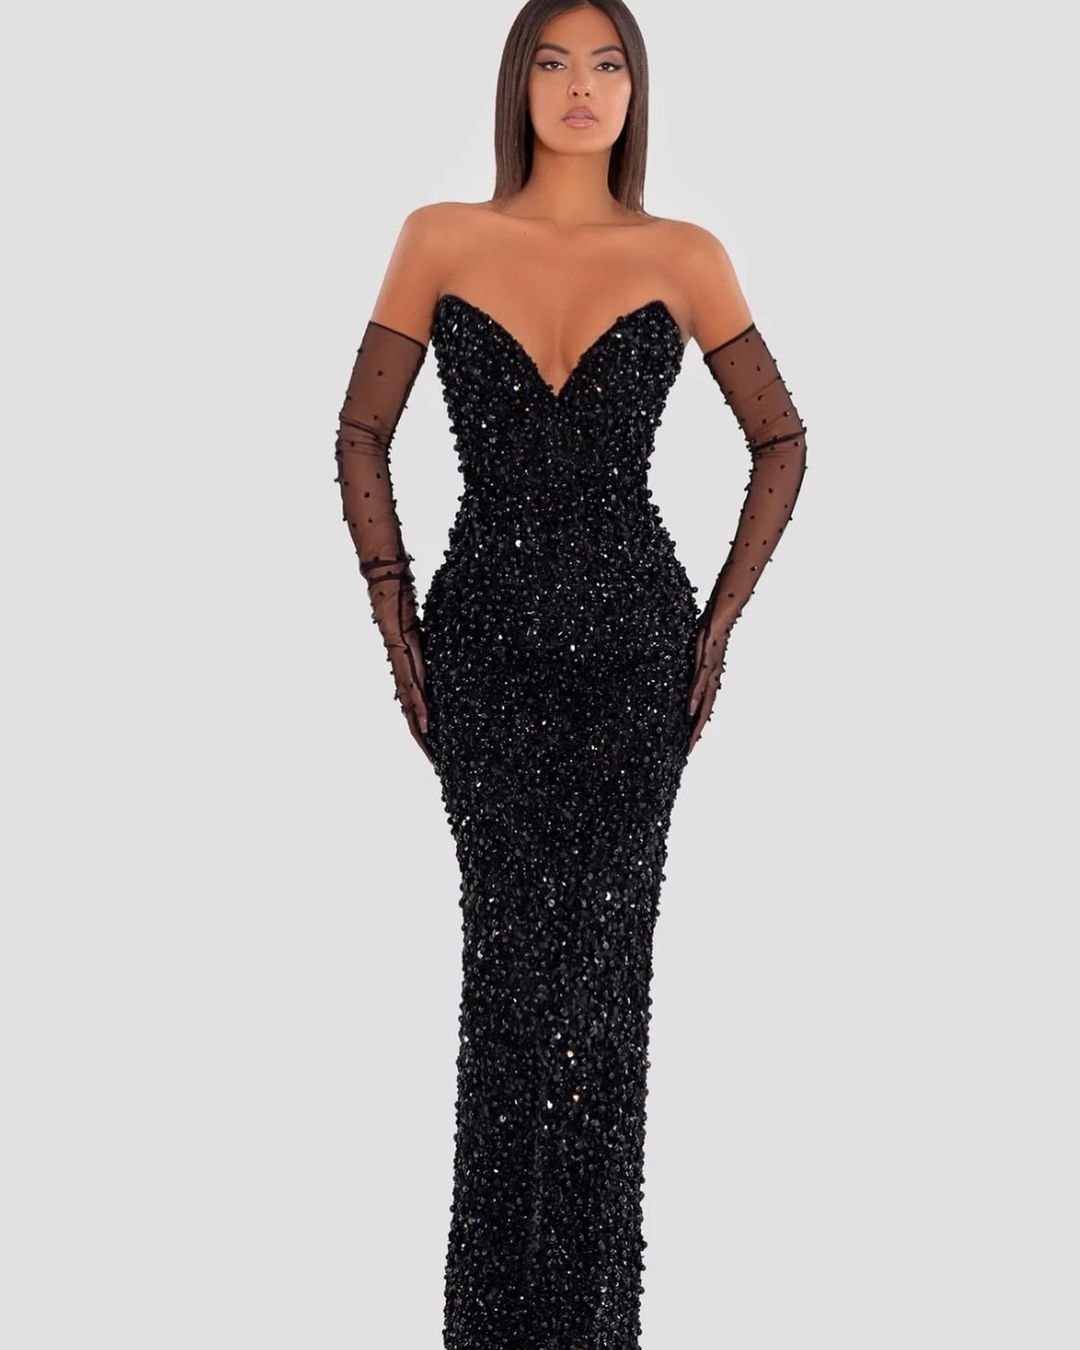 Daisda Black Sequins Sweetheart Mermaid Prom Gown Dress with Gloves